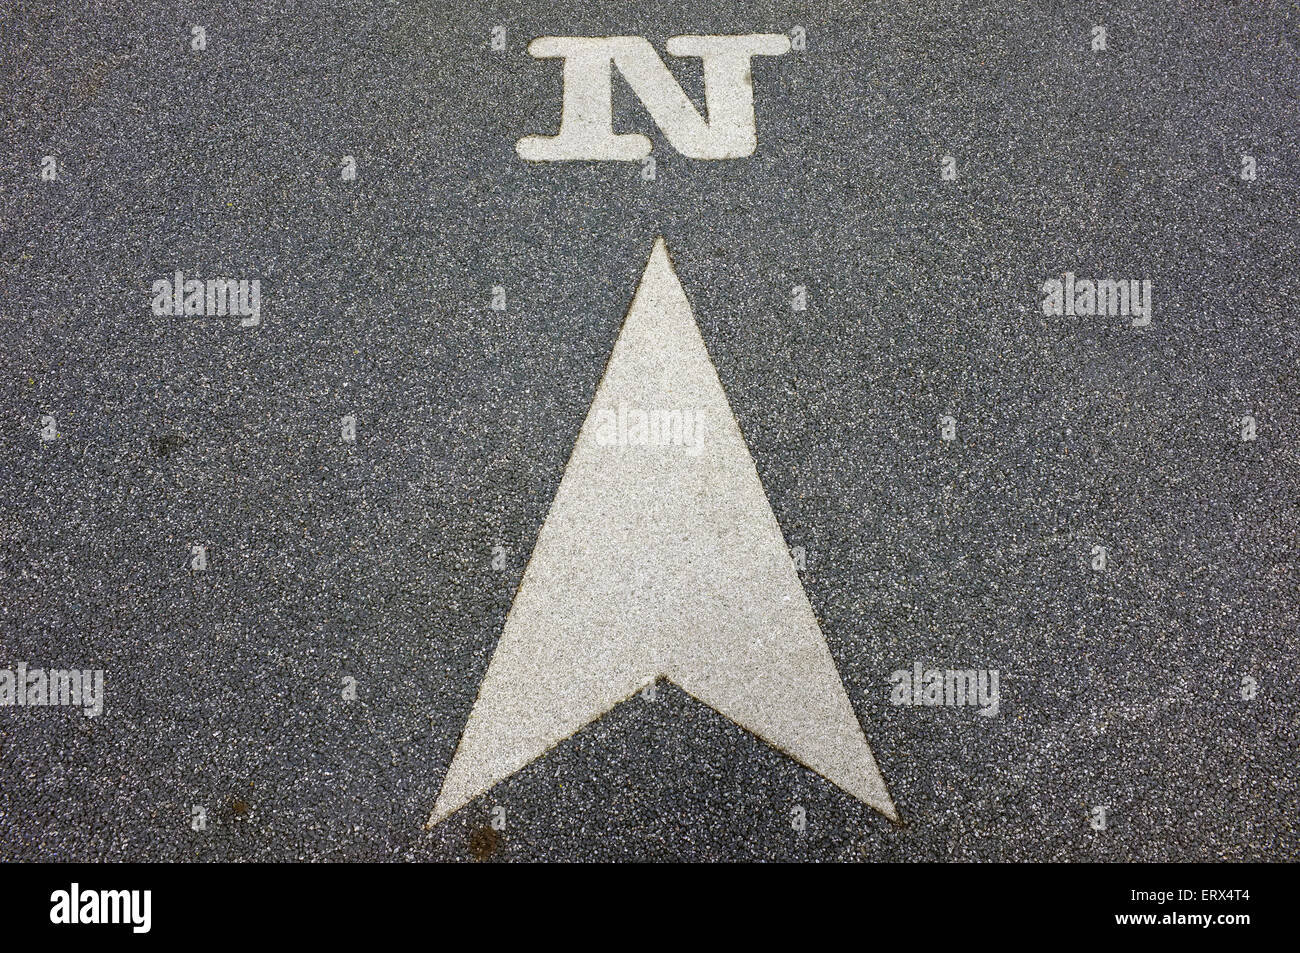 An arrow indicating the direction of North painted onto tarmac. Stock Photo